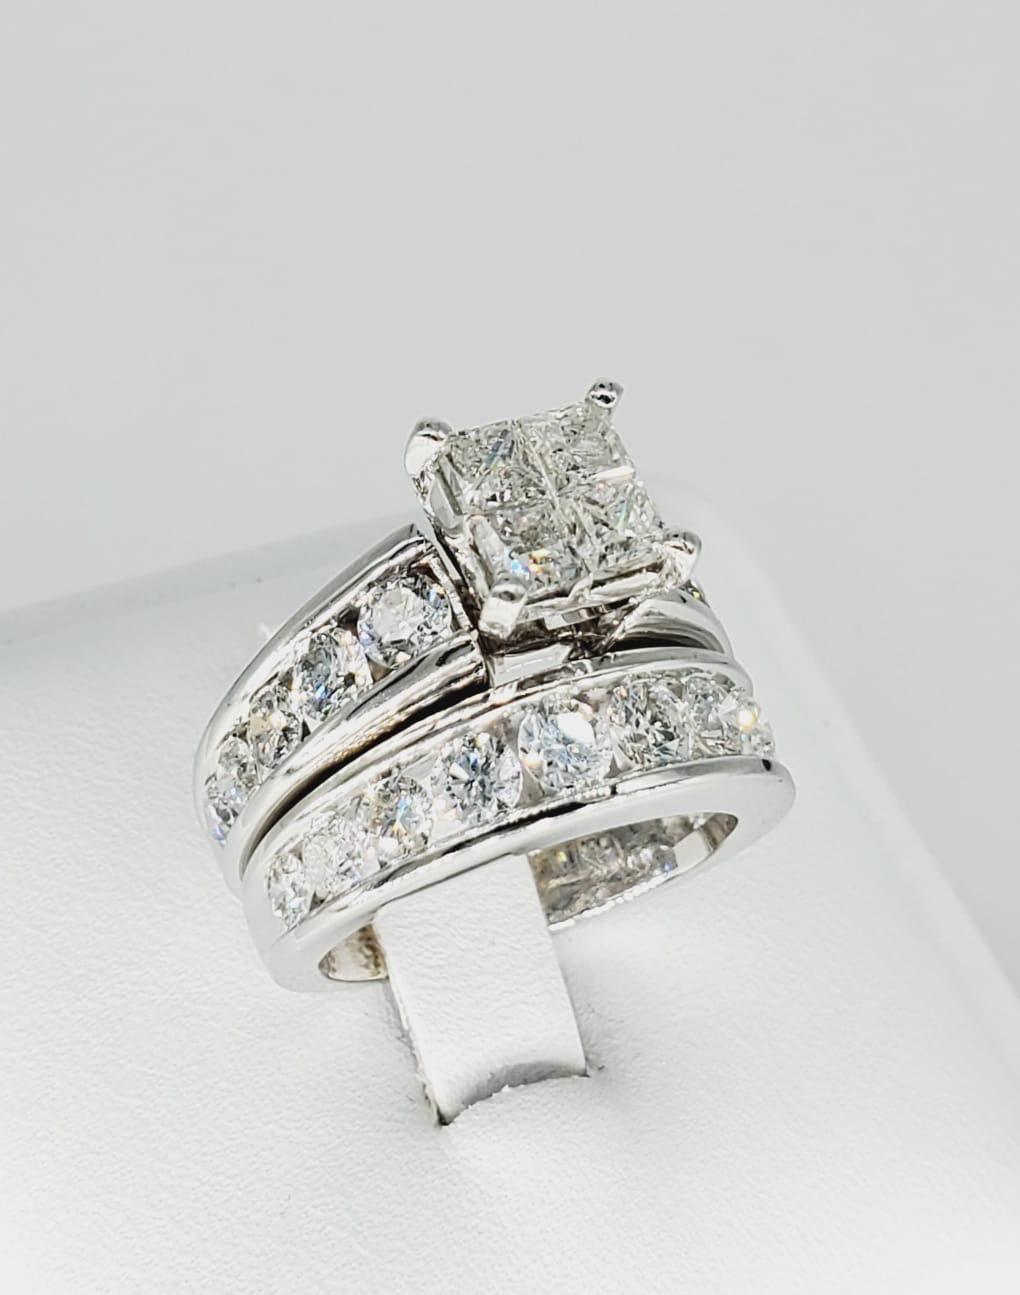 14k White Gold 6.25 Carat Diamonds Engagement Ring Set. Astonishing design with channel settings across the band and main ring matching a perfect set. The ring is a size 6.5 and weights approx 14.50 grams. The Diamonds are natural and are very clean